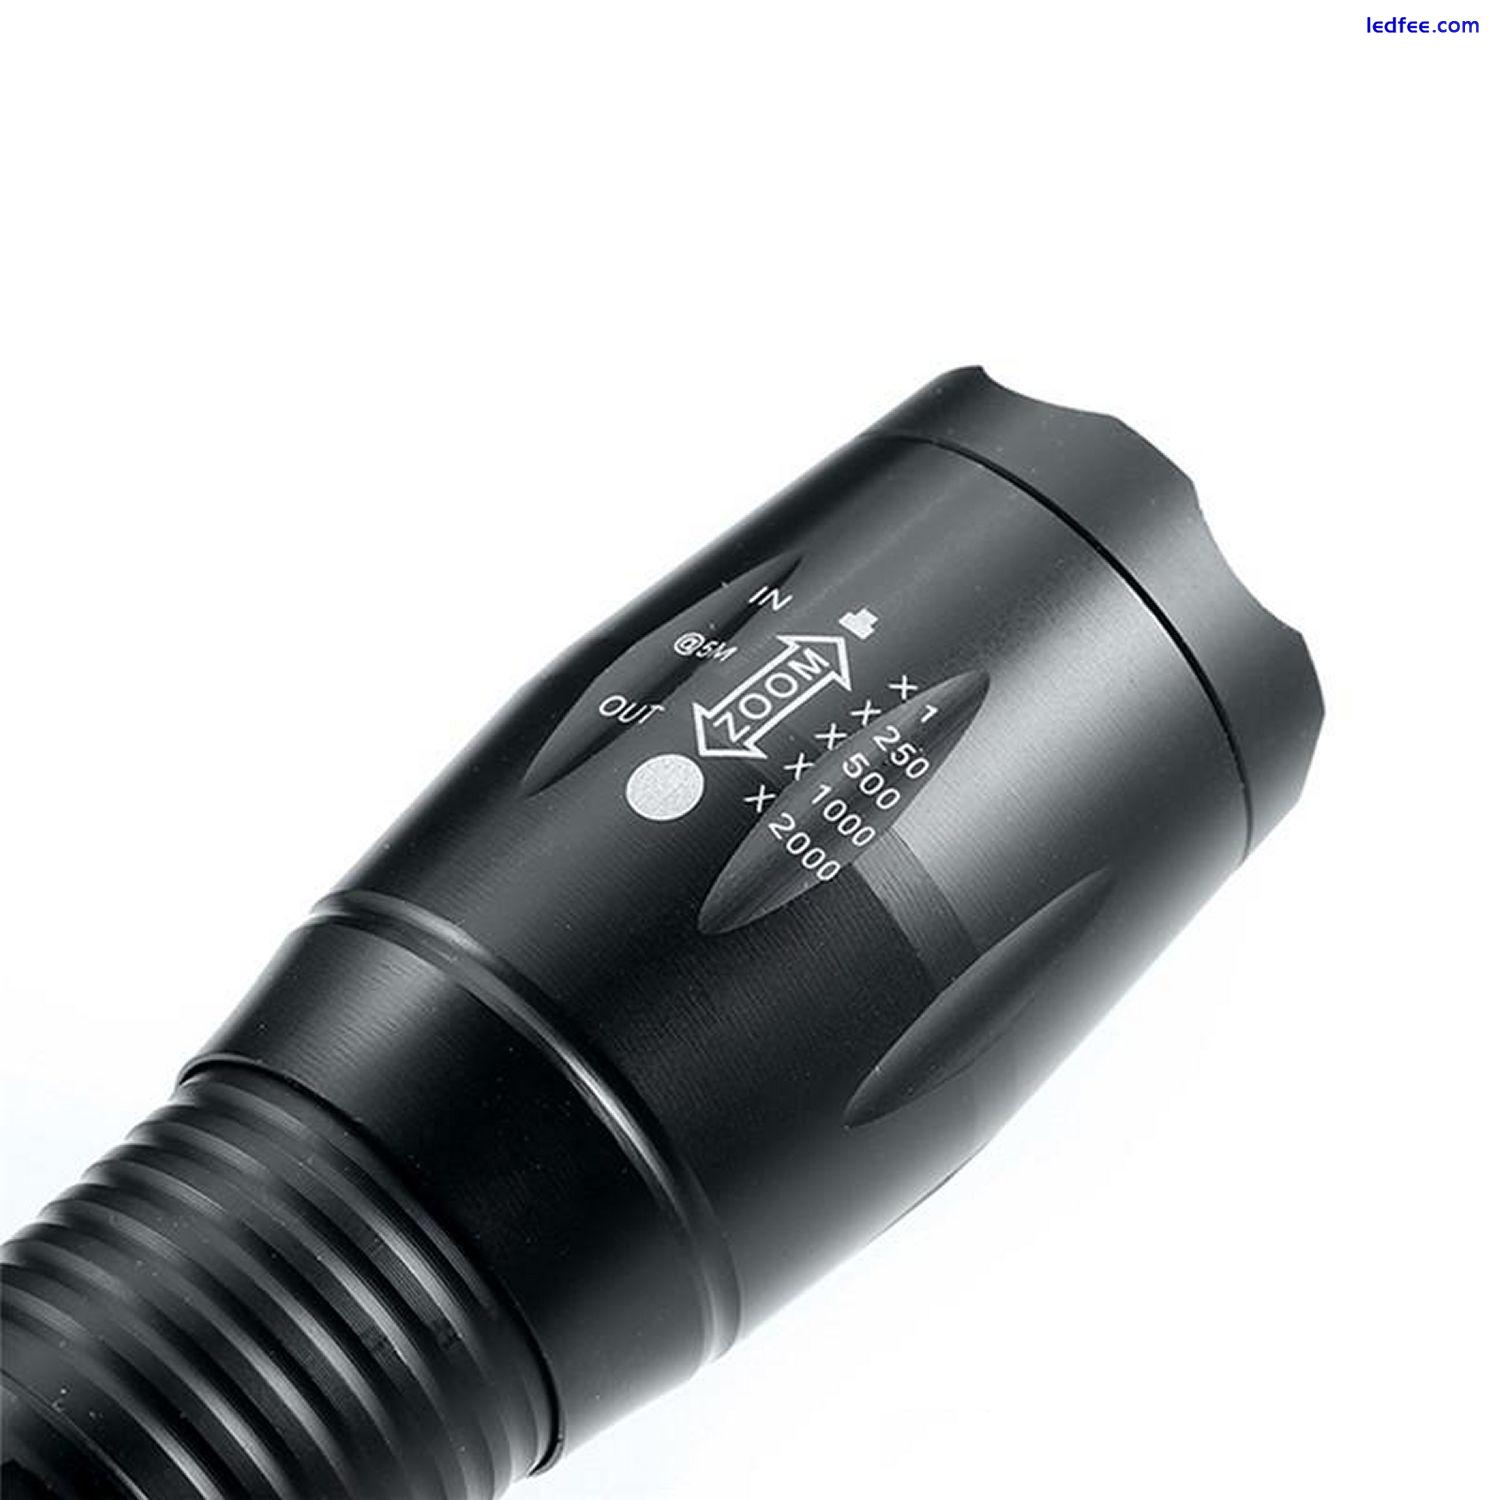 LED Torch Flashlight Police Military Bright High Power Waterproof, Zoom Tactical 1 